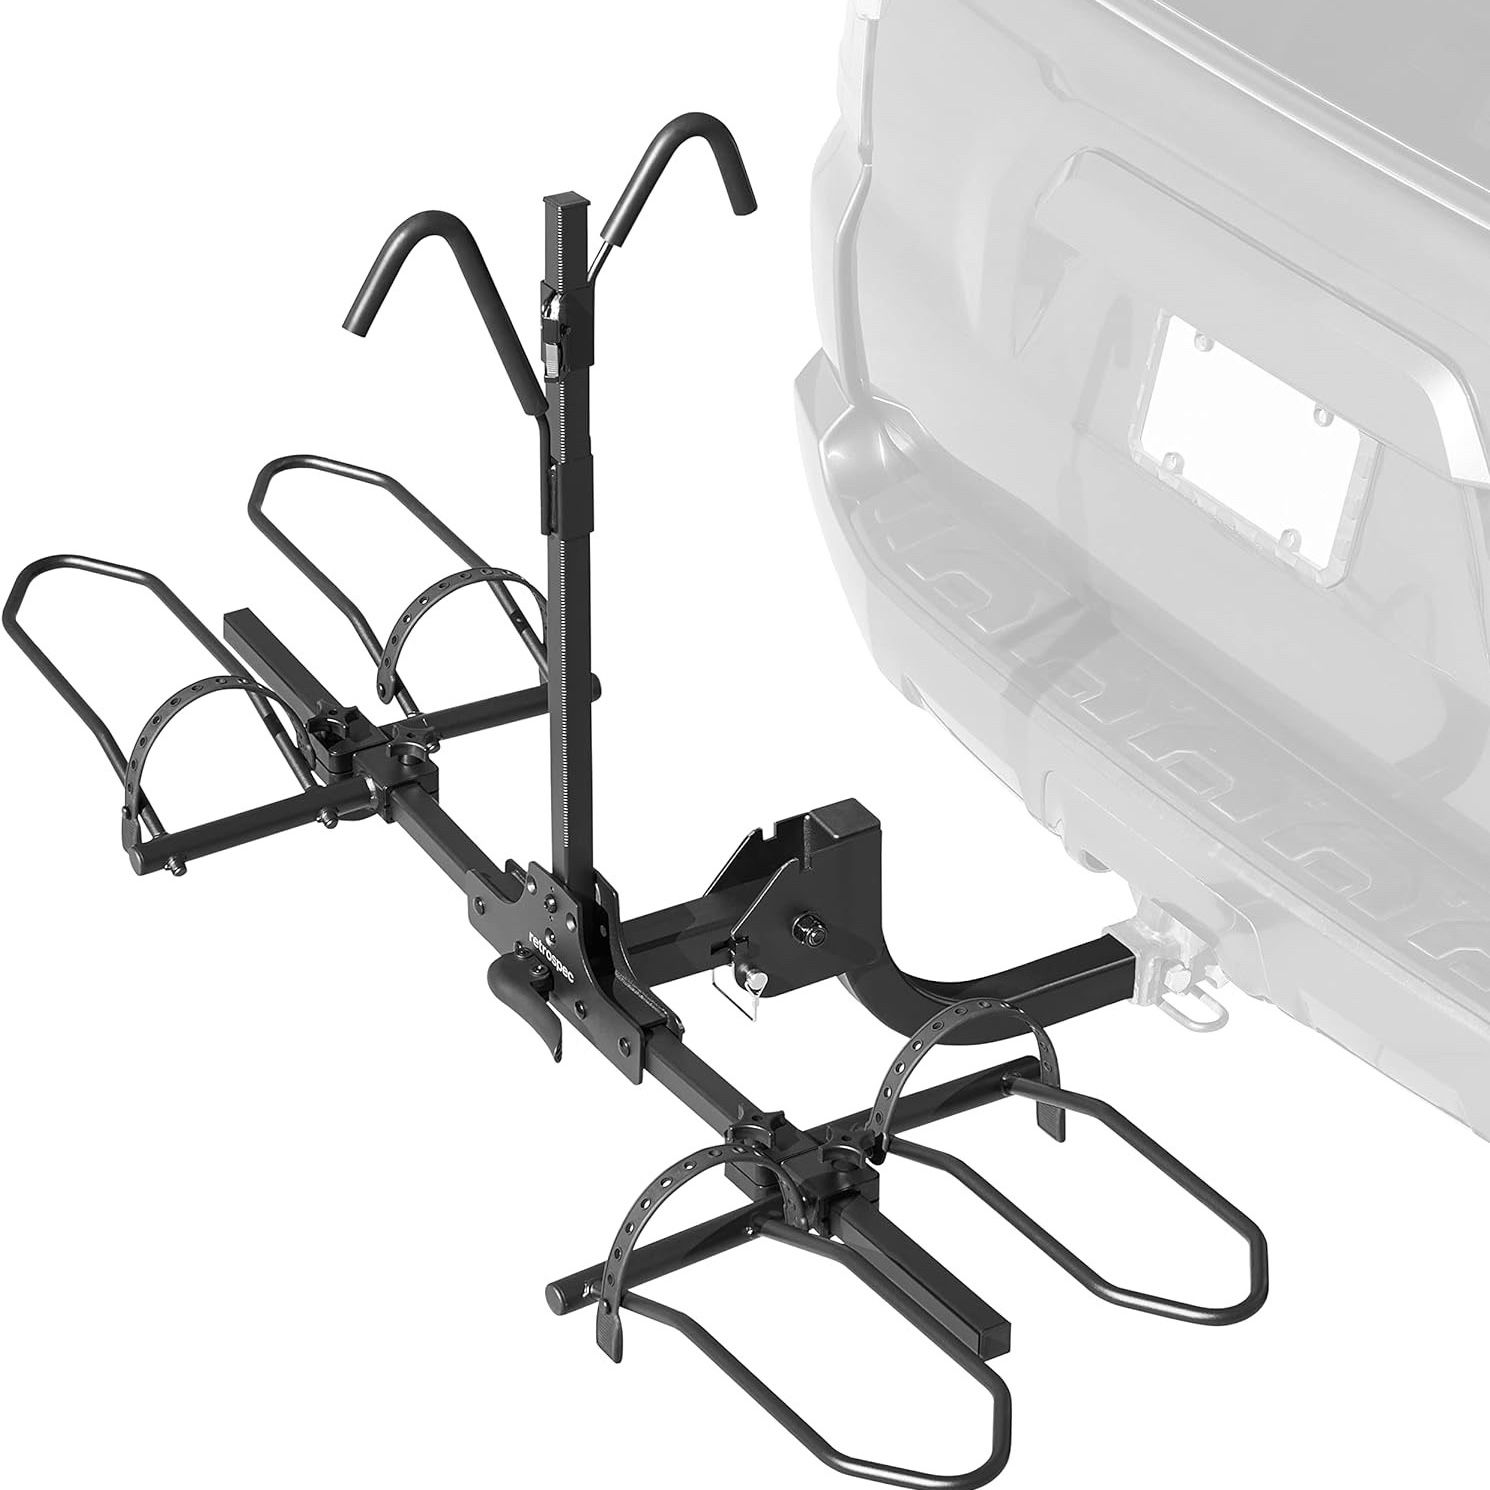 2-E-Bike Hitch Mount Rack for Cars, Trucks, SUVs - 160lb Max Weight, Accommodates Electric Bikes with 20-29" Wheels - Foldable, Anti-Rattle, Compatibl